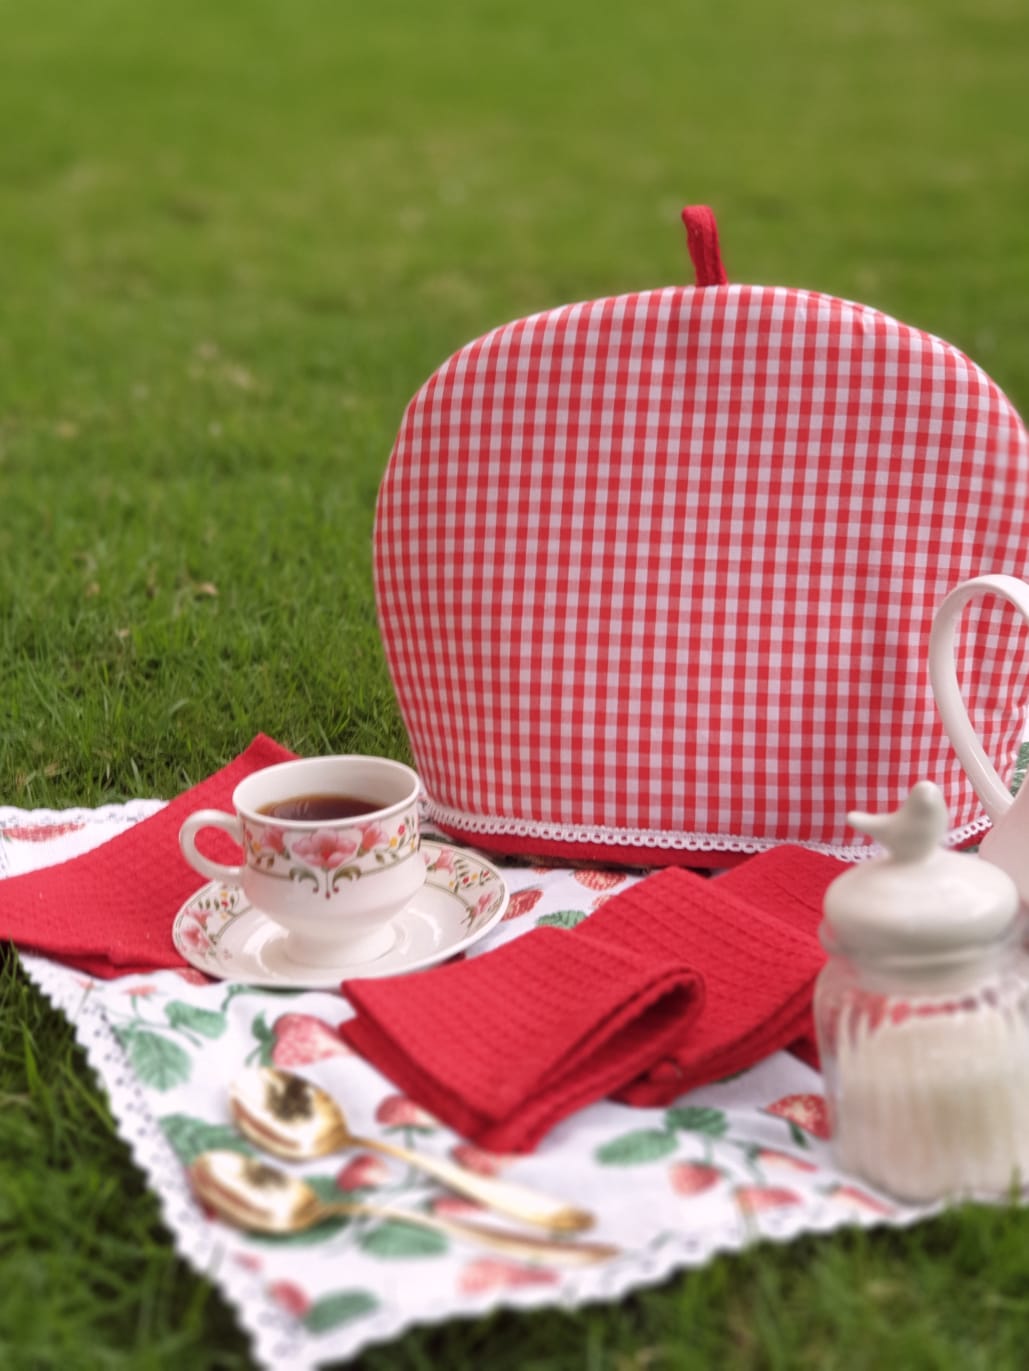 Tea Cozy Set - Strawberry and gingham themed